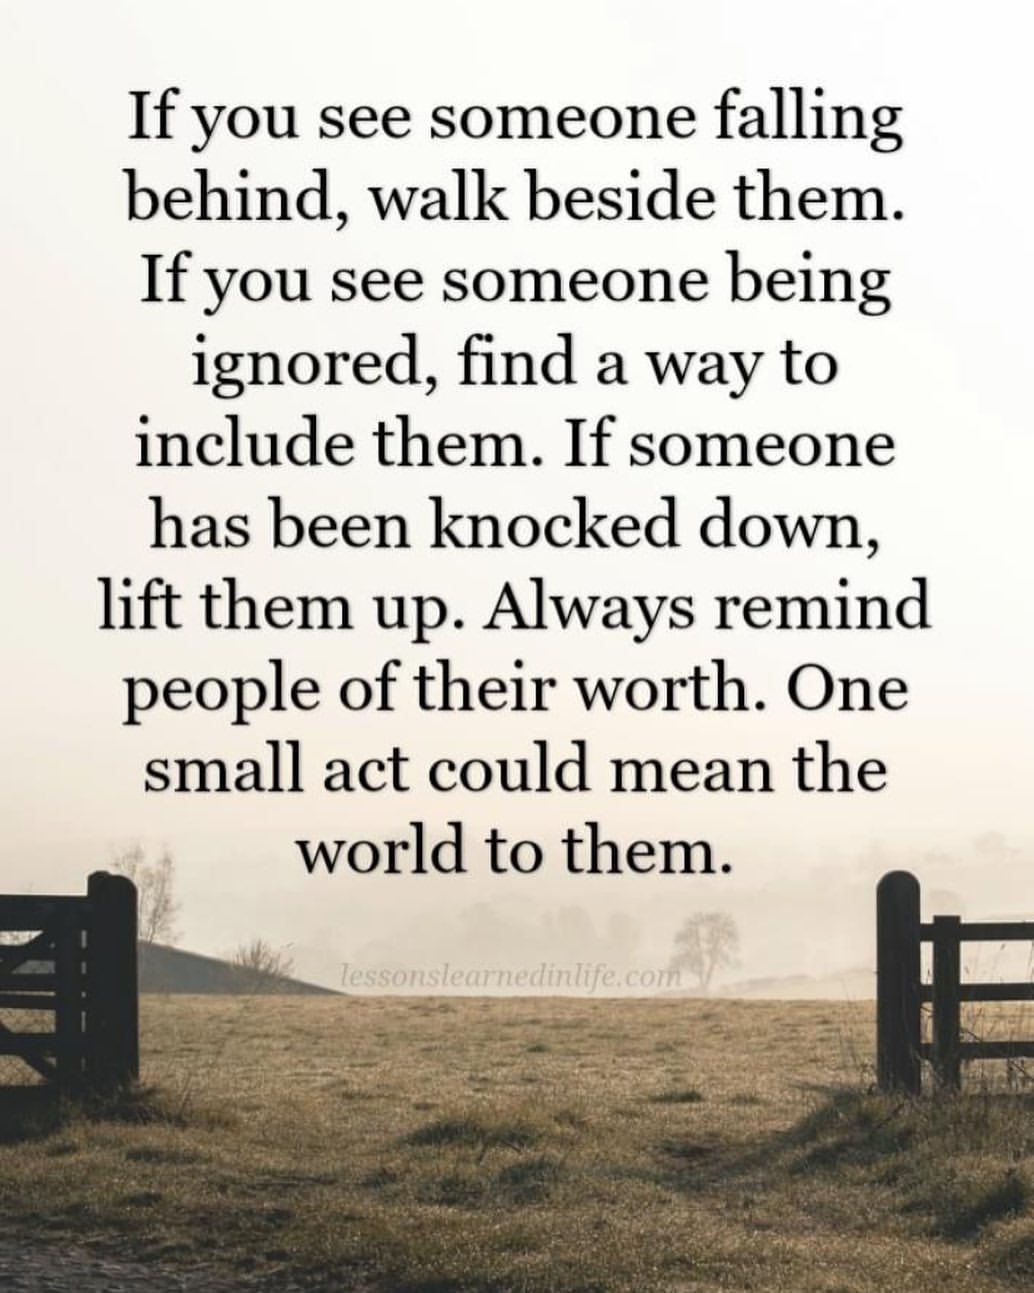 If you see someone falling behind, walk beside them. If you see someone being ignored, find a way to include them. If someone has been knocked down, lift them up. Always remind people of their worth. One small act could mean the world to them.